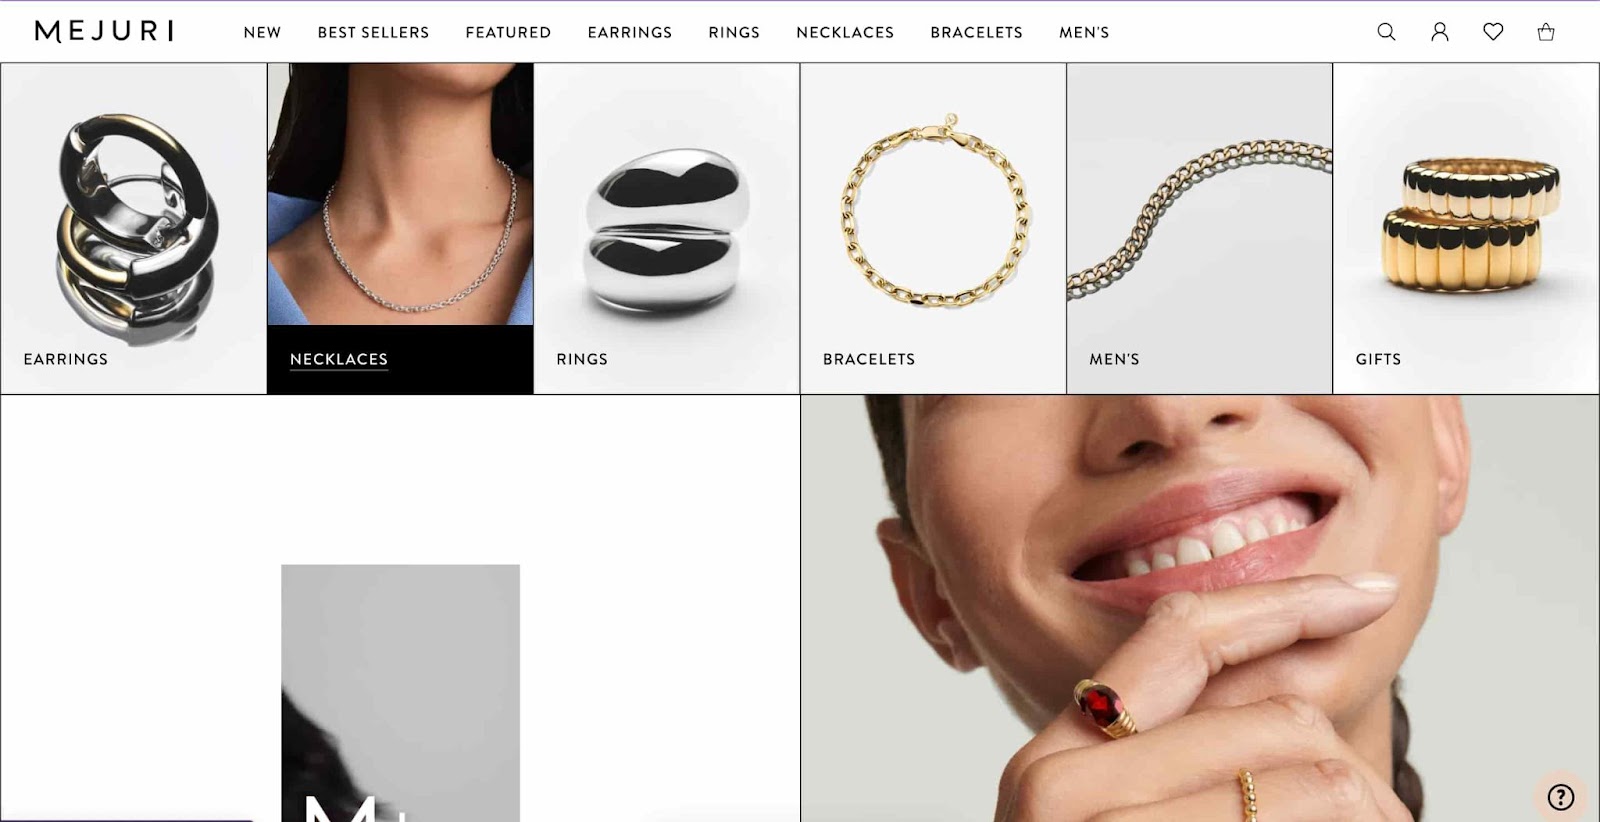 Mejuri website hovering over necklaces showing a model wearing the pictured necklace